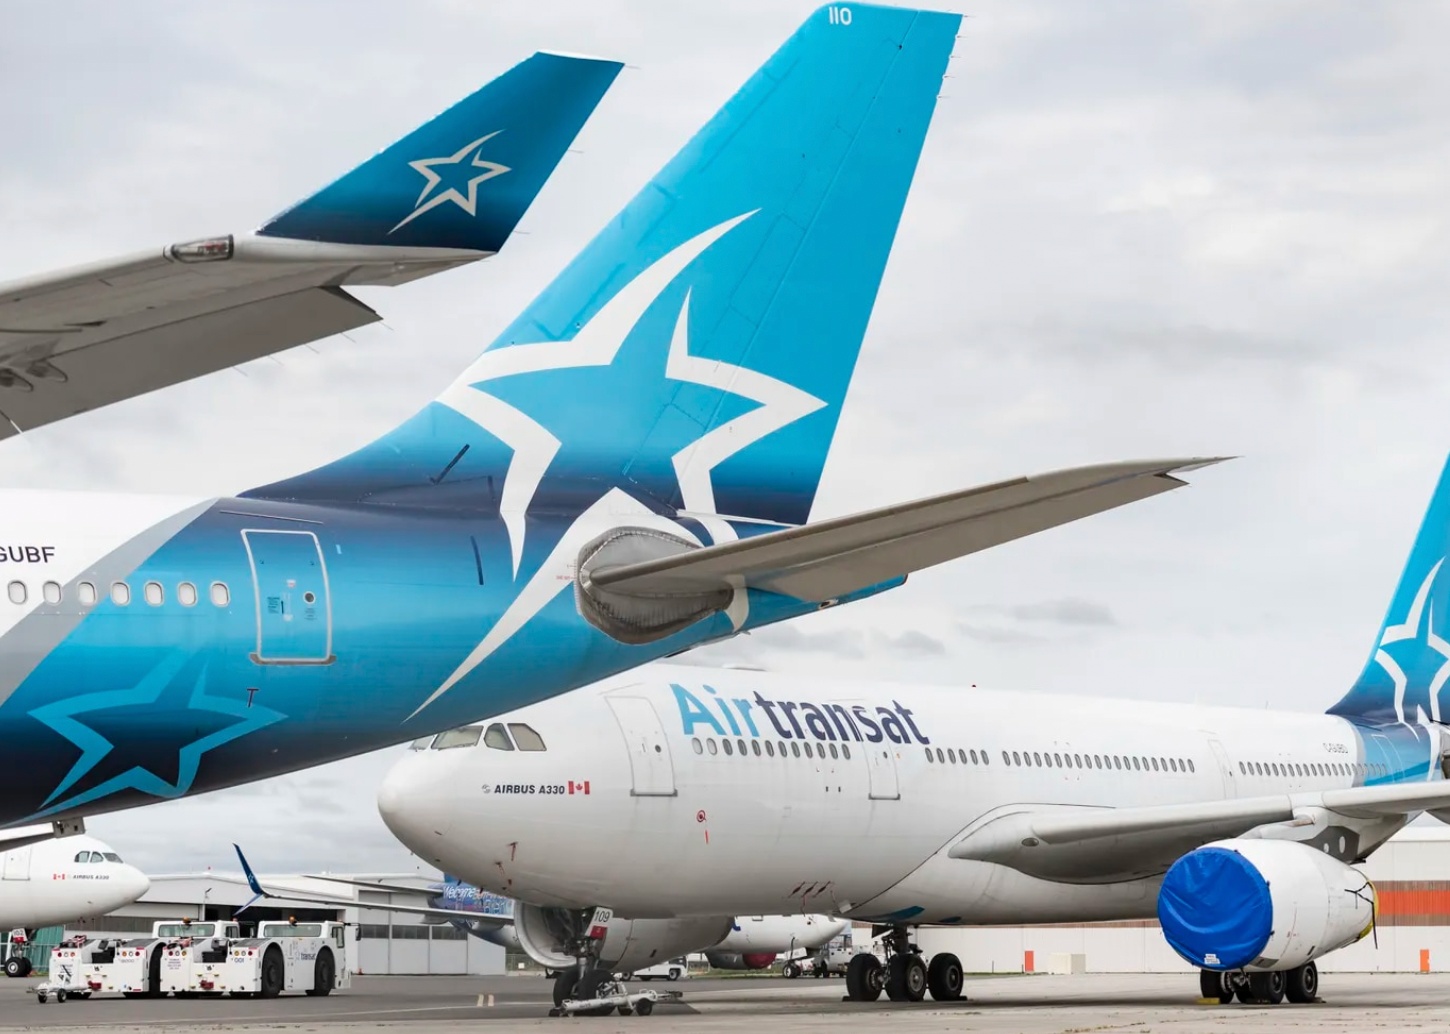 Transat had to cut more than 200 flight attendant jobs in Vancouver